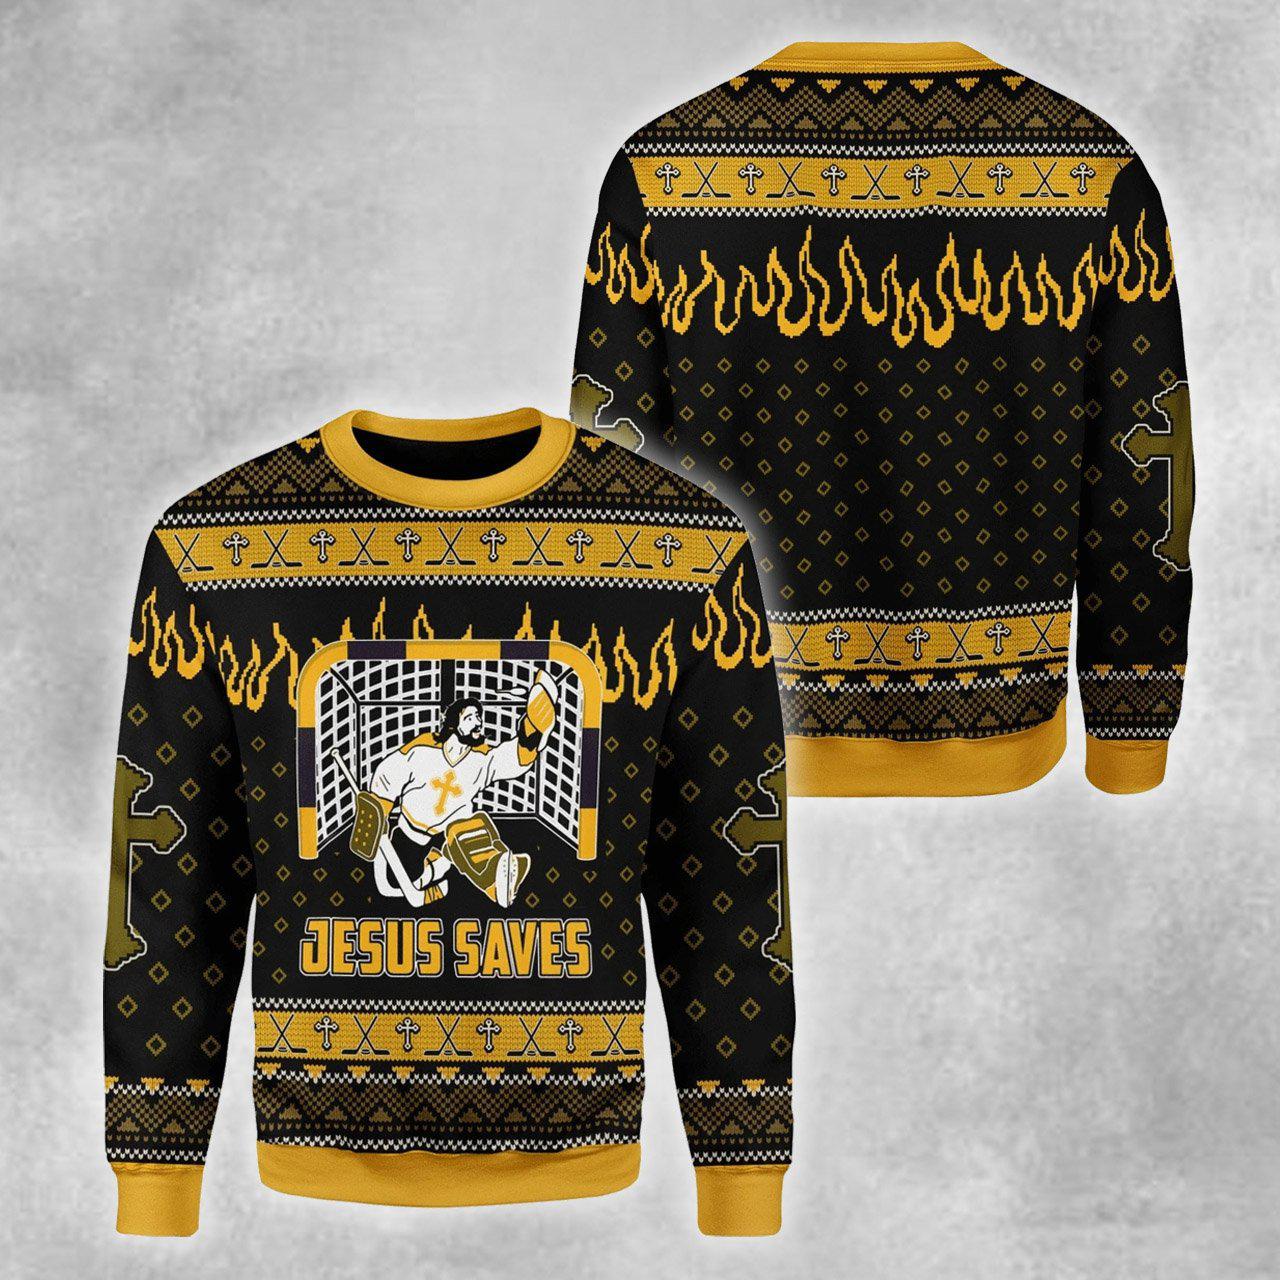 Jesus Saves Hockey Ugly Christmas Sweater For Men & Women Adult - Jesus Christ Sweater - Christian Shirts Gifts Idea